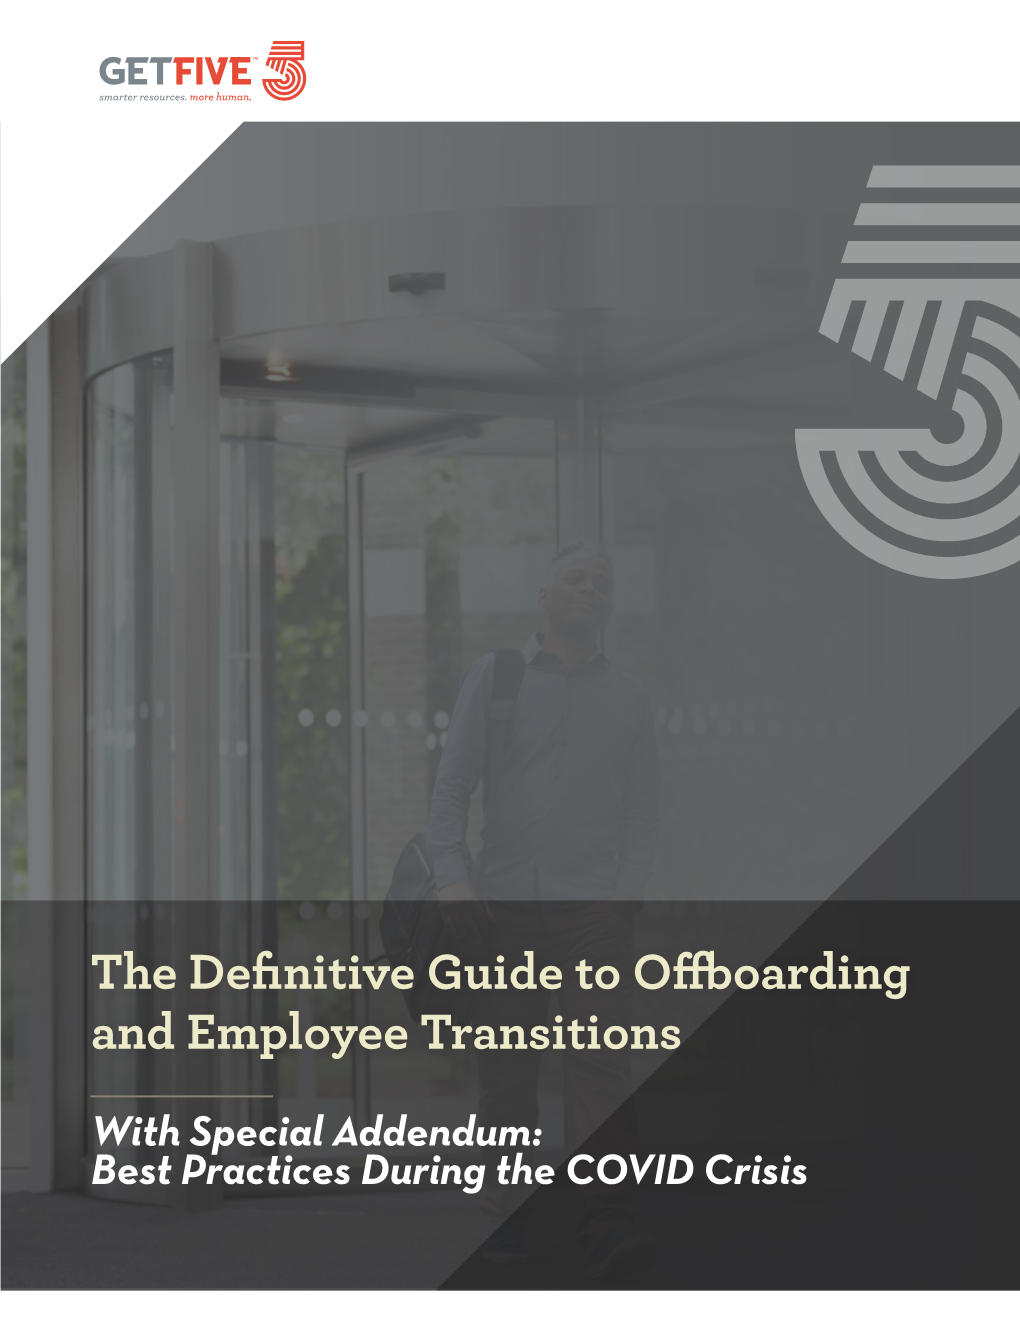 The Definitive Guide to Offboarding and Employee Transitions